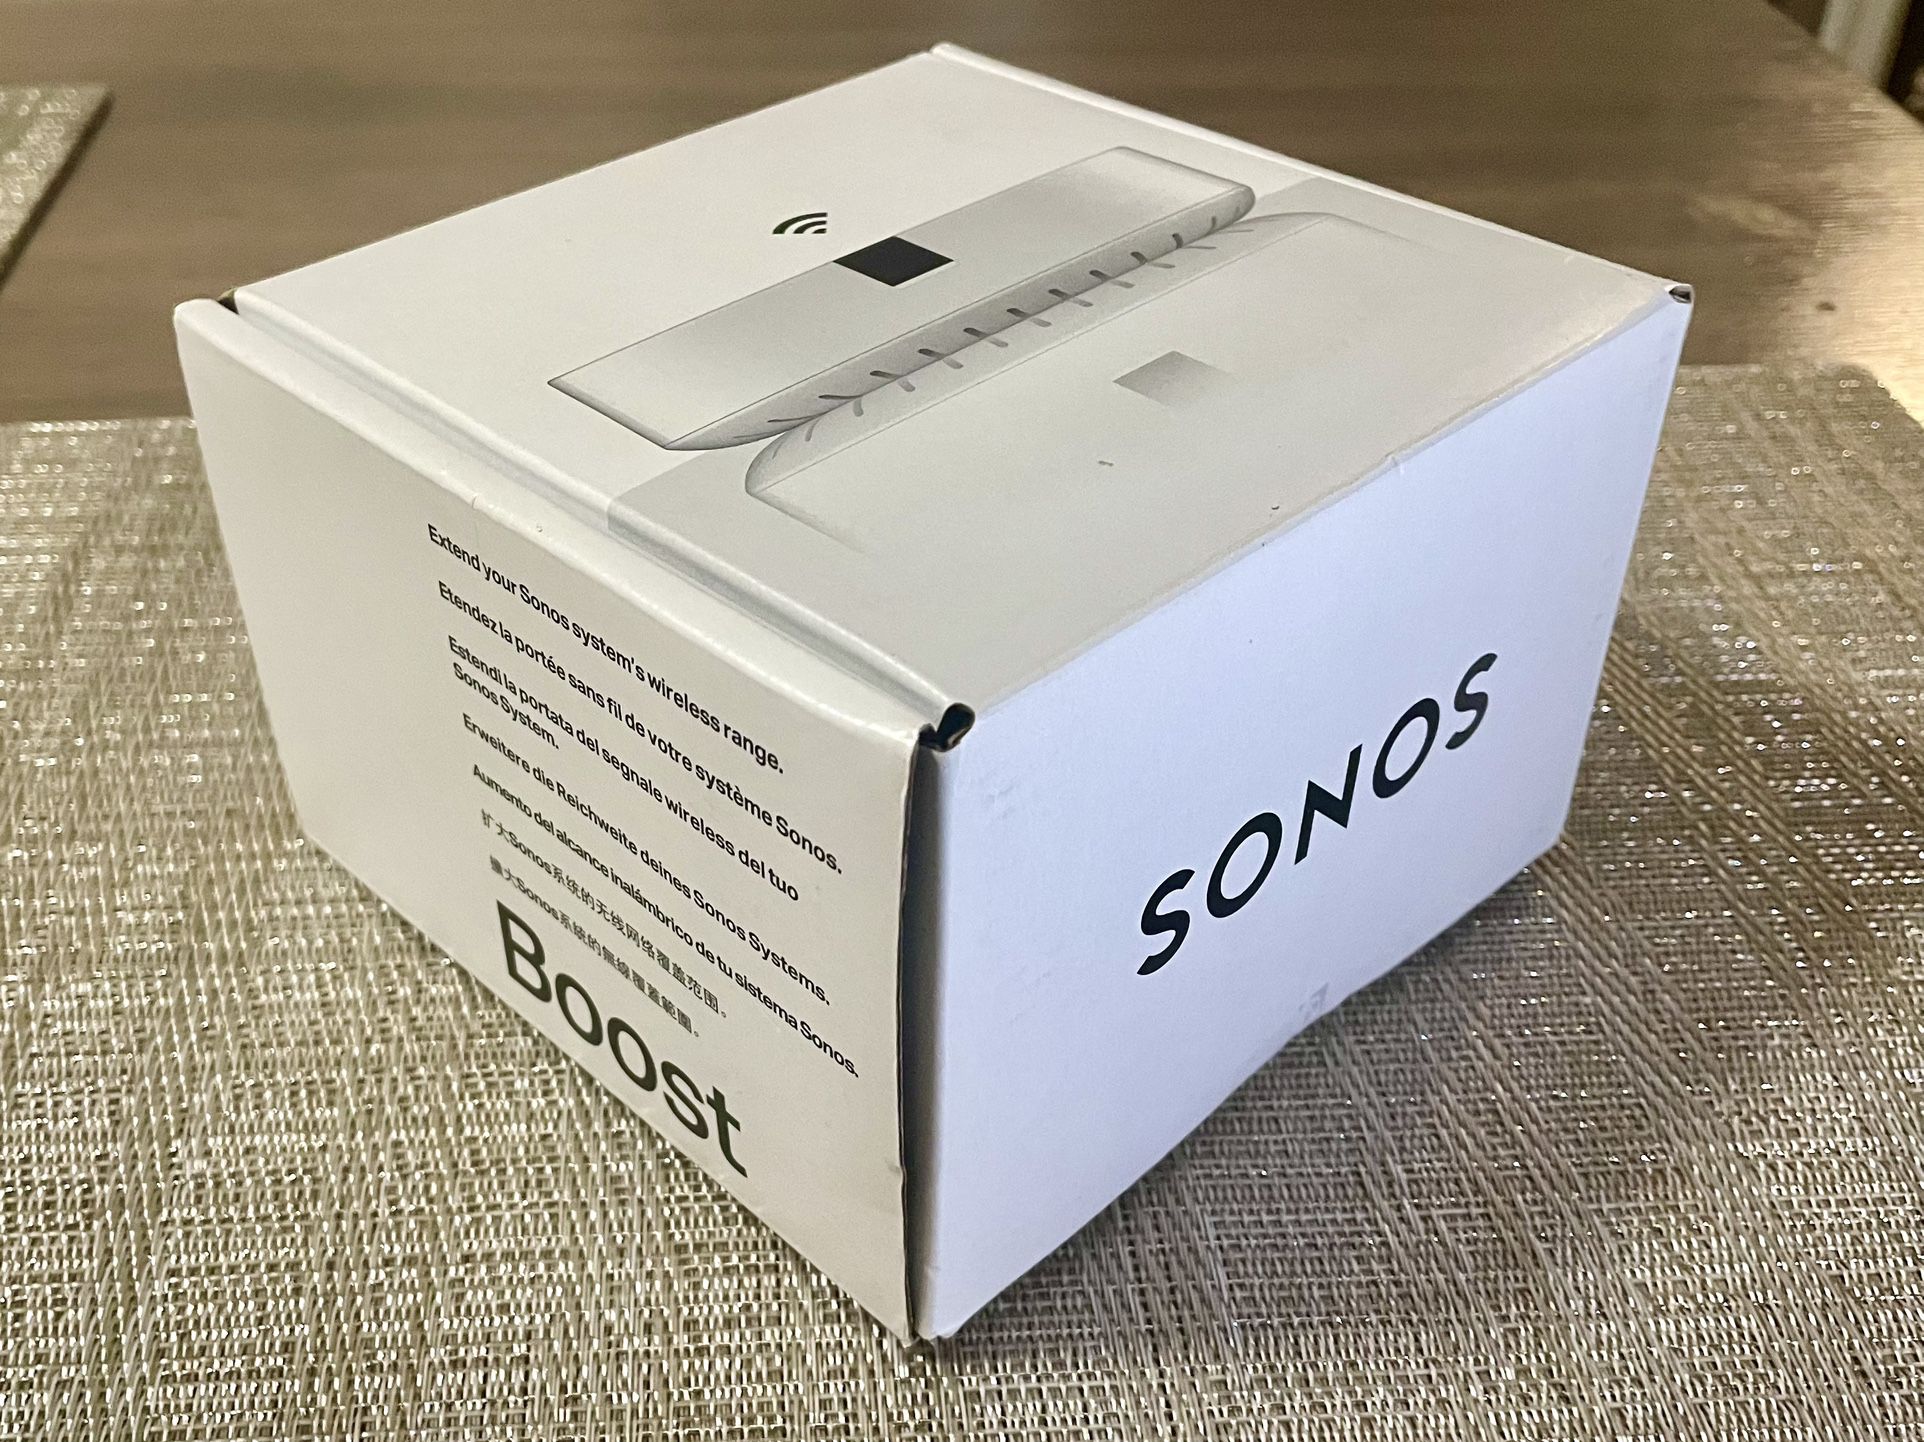 Sonos Boost Integrated Network Extender.